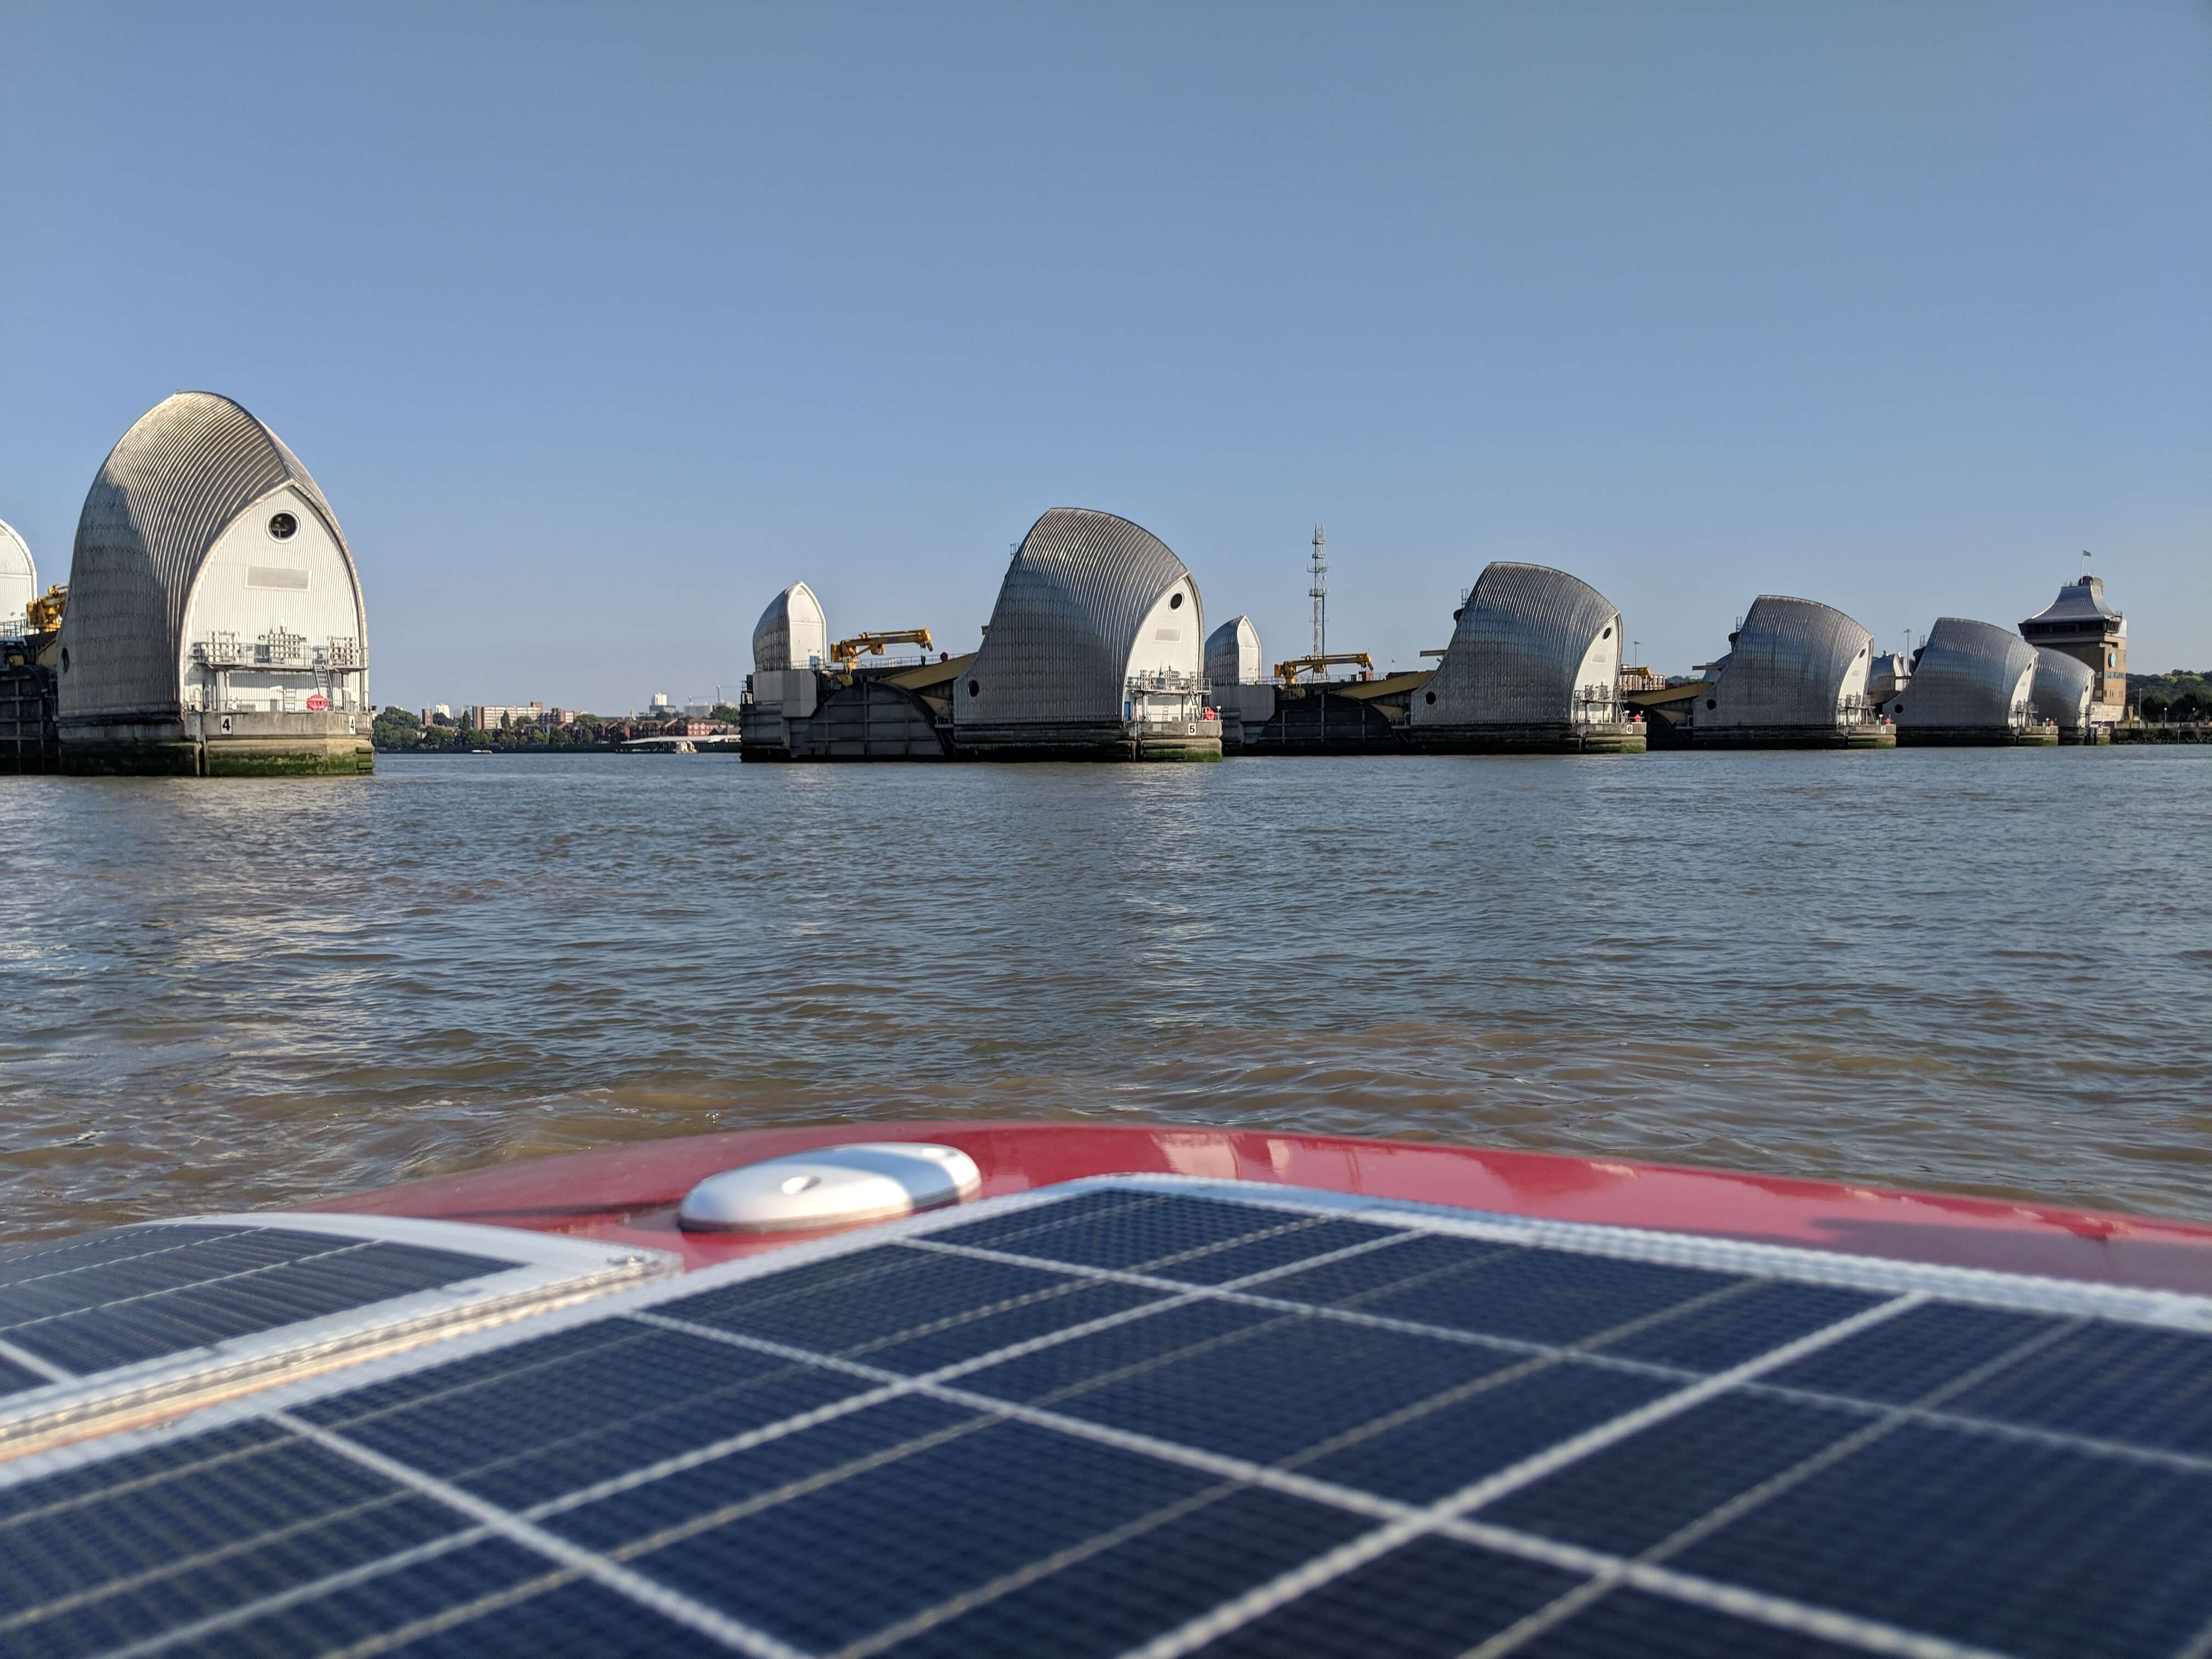 Rowing past the Thames Barrier